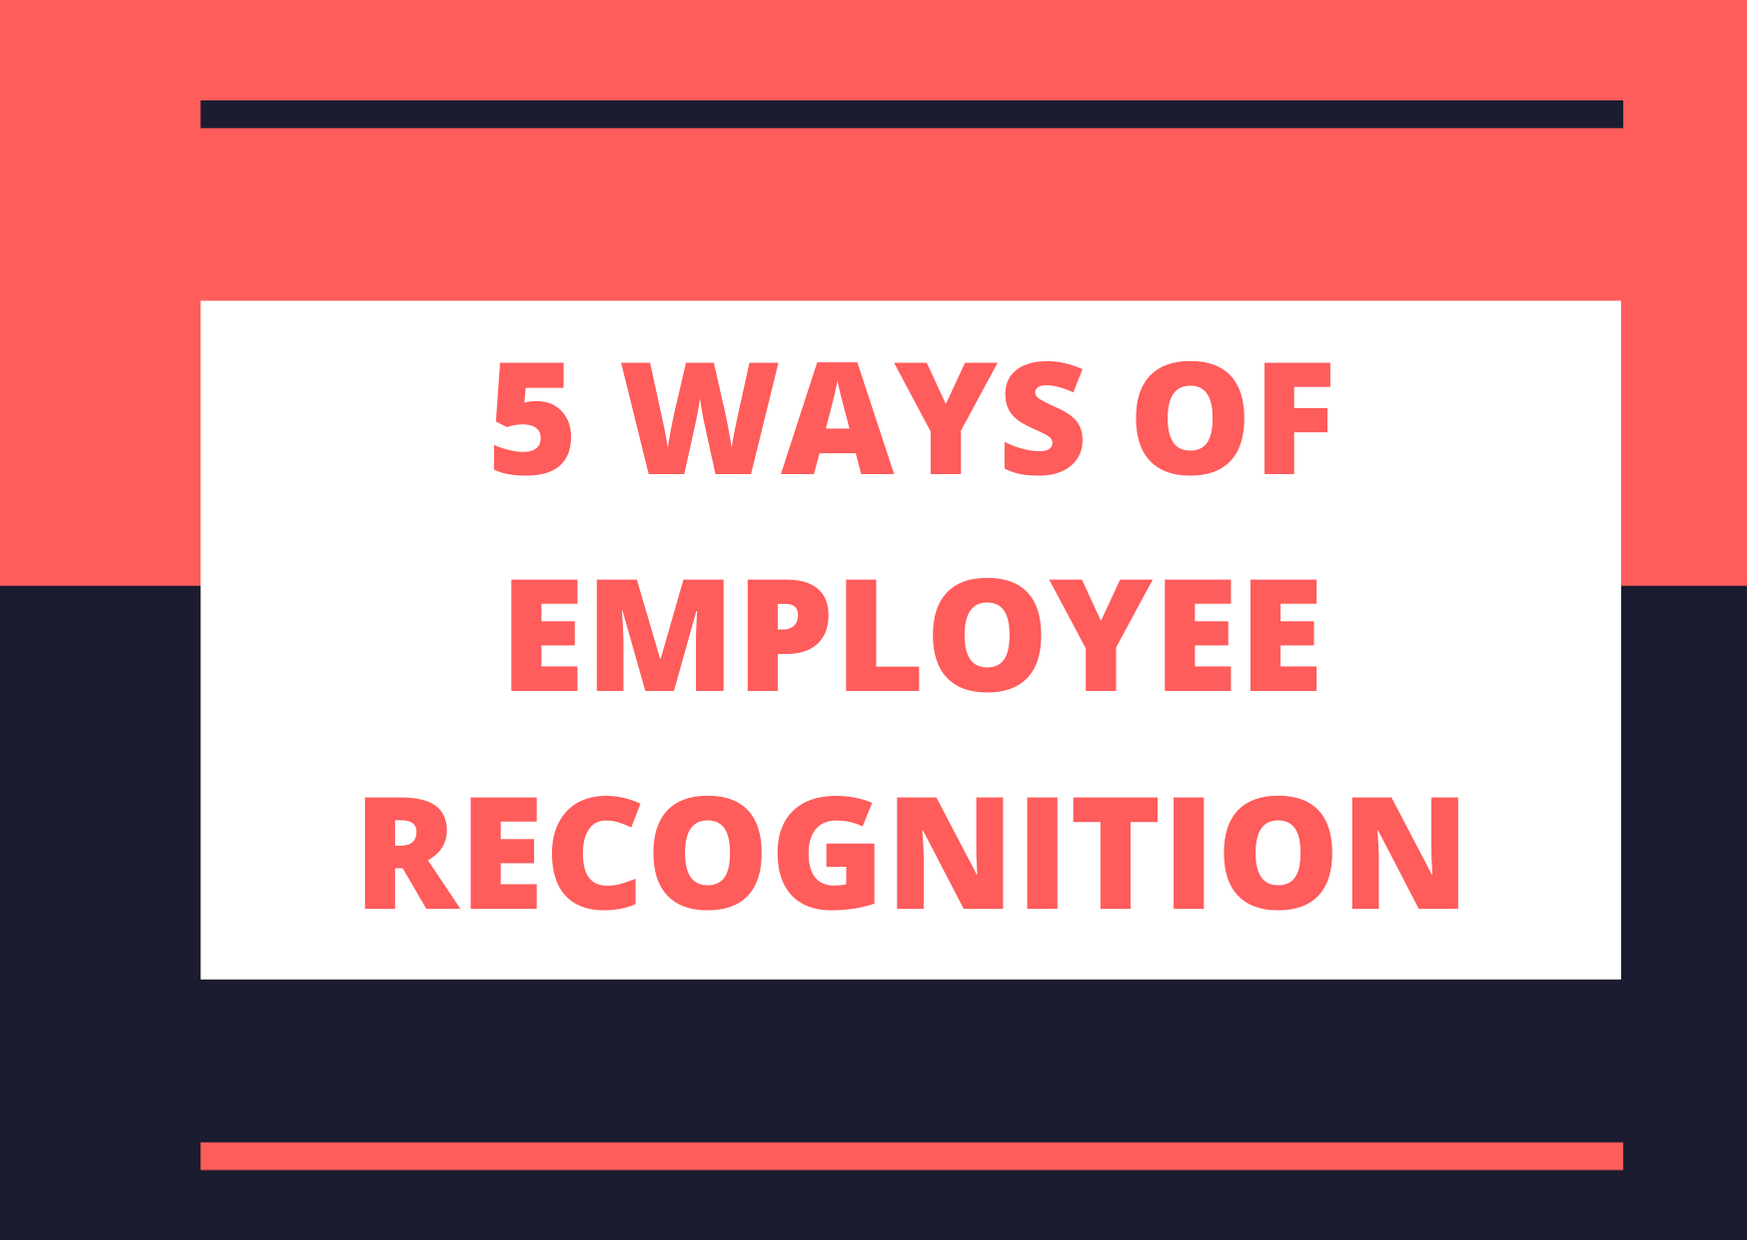 5 Ways of Employee Recognition